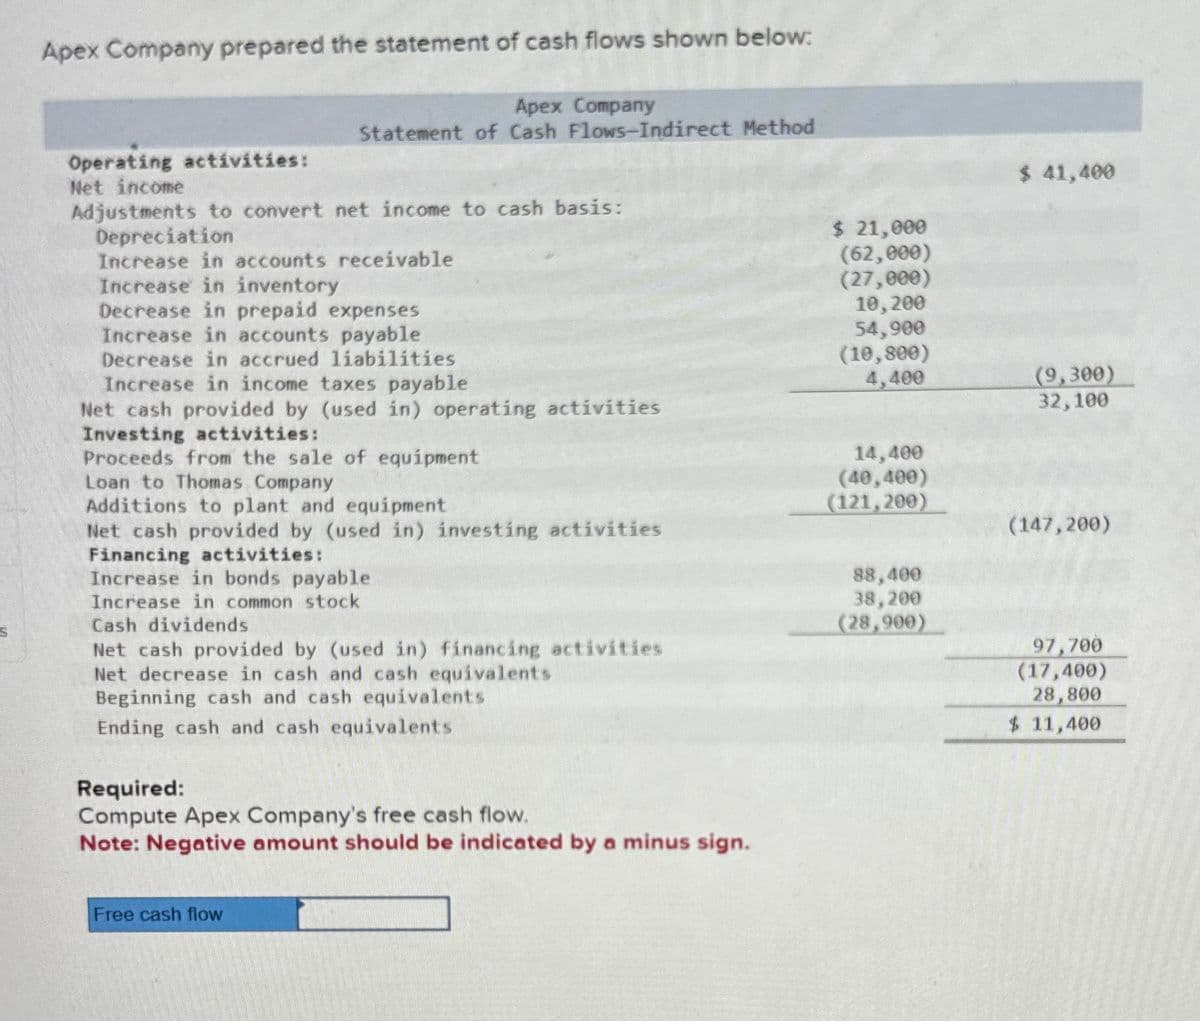 Apex Company prepared the statement of cash flows shown below:
Apex Company
Statement of Cash Flows-Indirect Method
Operating activities:
Net income
$ 41,400
Adjustments to convert net income to cash basis:
Depreciation
$ 21,000
Increase in accounts receivable
Increase in inventory
(62,000)
(27,000)
Decrease in prepaid expenses
10,200
Increase in accounts payable
54,900
Decrease in accrued liabilities
(10,800)
Increase in income taxes payable
4,400
Net cash provided by (used in) operating activities
(9,300)
32,100
Investing activities:
Proceeds from the sale of equipment
14,400
Loan to Thomas Company
(40,400)
Additions to plant and equipment
(121,200)
Net cash provided by (used in) investing activities
Financing activities:
(147,200)
Increase in bonds payable
88,400
Increase in common stock
38,200
S
Cash dividends
(28,900)
Net cash provided by (used in) financing activities
Net decrease in cash and cash equivalents
97,700
(17,400)
Beginning cash and cash equivalents
Ending cash and cash equivalents
28,800
$ 11,400
Required:
Compute Apex Company's free cash flow.
Note: Negative amount should be indicated by a minus sign.
Free cash flow